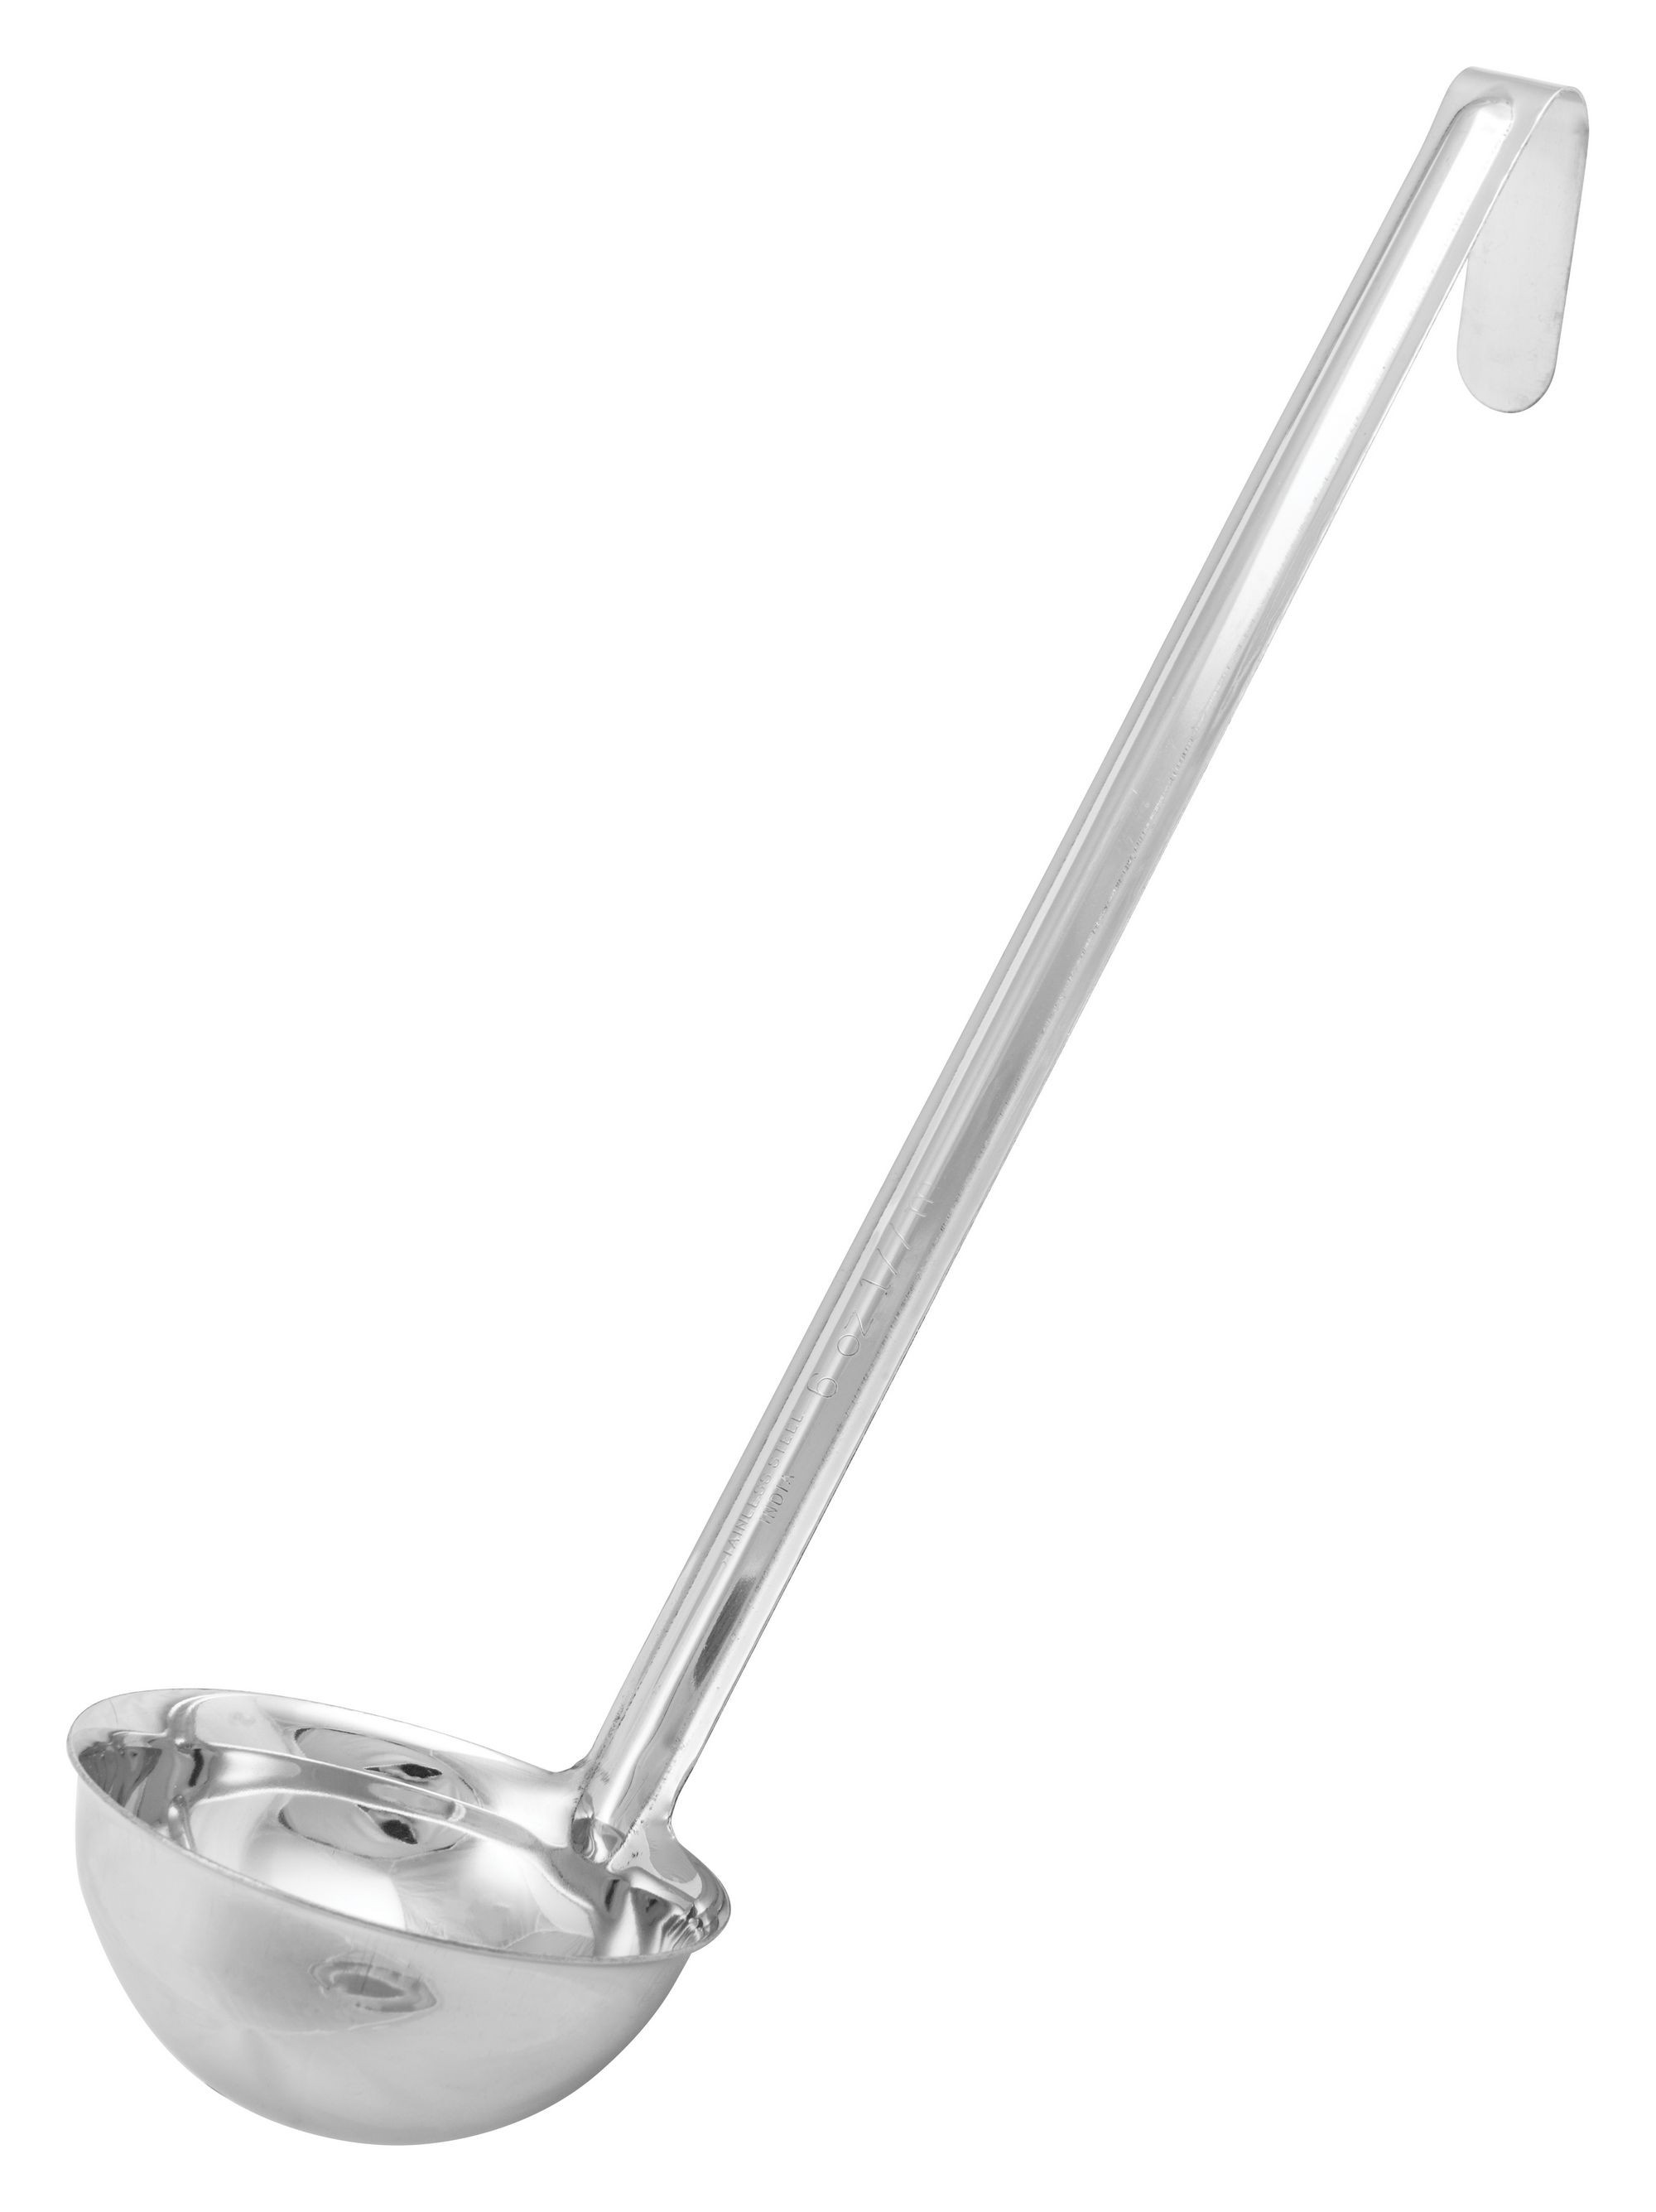 Winco LDIN-6 Stainless Steel One-Piece 6 oz. Ladle